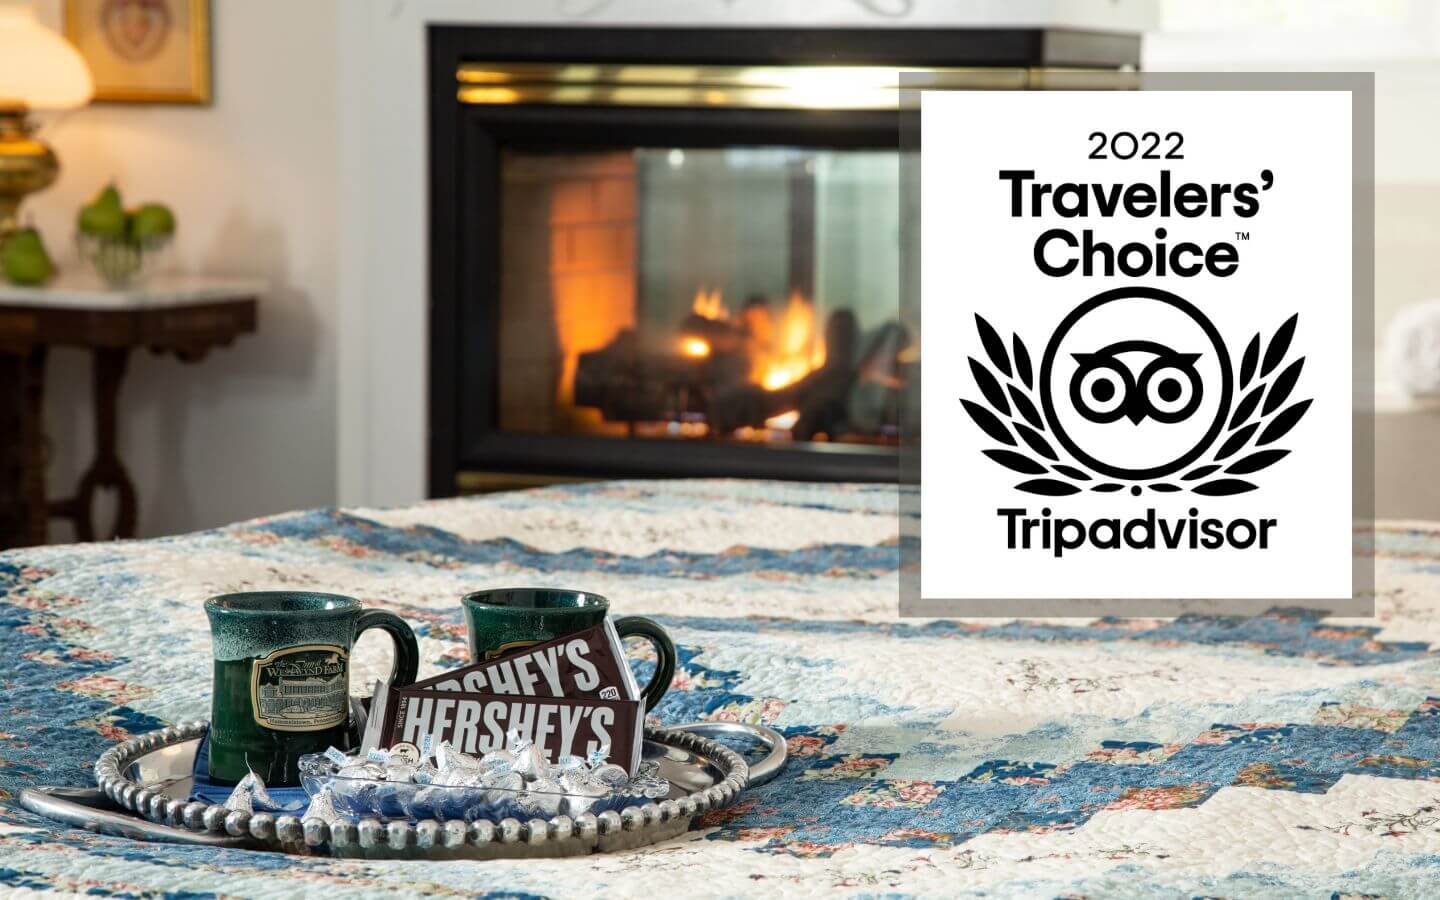 View of corner of bed, tray with mugs and chocolate, and a fireplace at the Inn at Westwynd Farm with 2022 TripAdvisor Travelers’ Choice Award